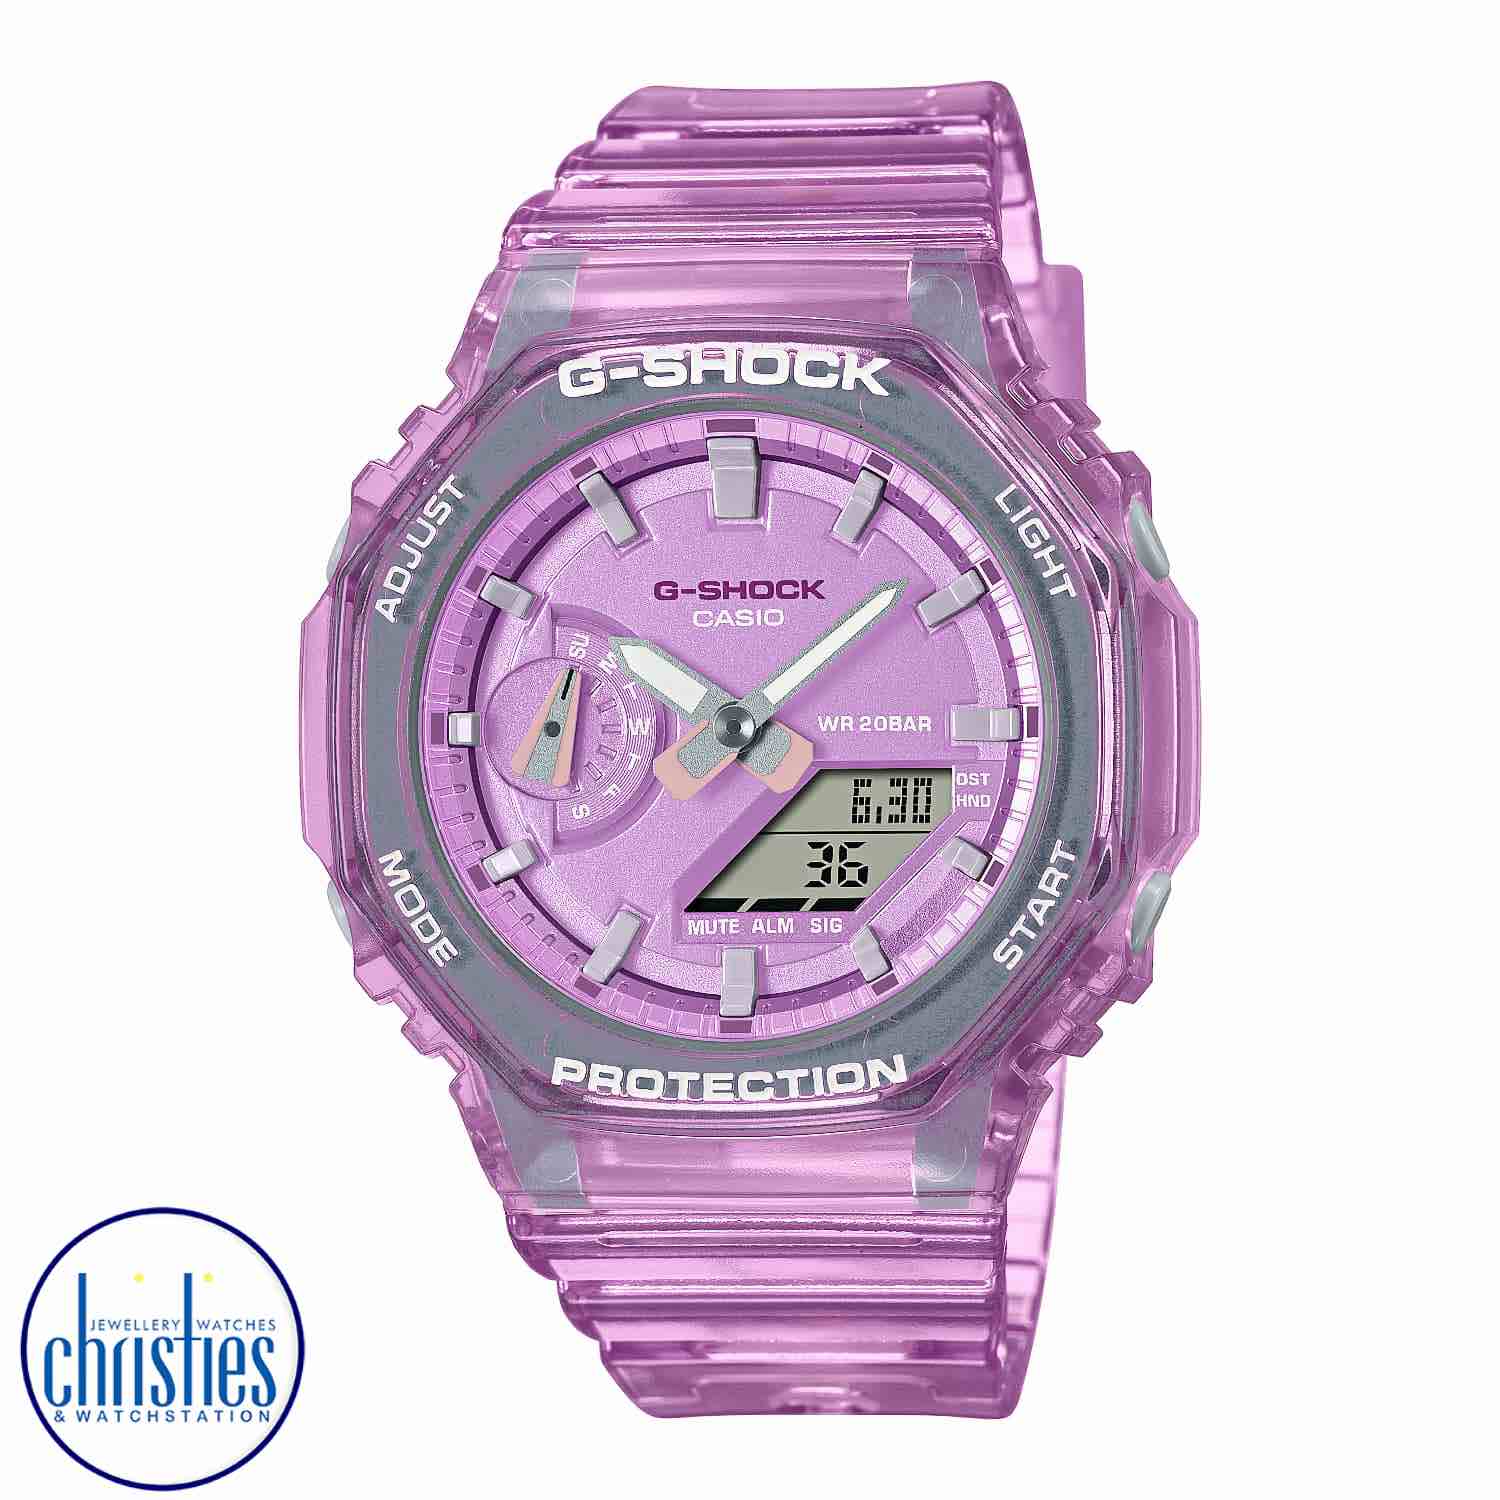 GMAS2100SK-4A G-SHOCK Metallic Translucent Womens Watch. Slip on a splash of clear metallic pleasure with the ever-popular analog-digital combination GA-2100 in a slimmer, more compact profile.